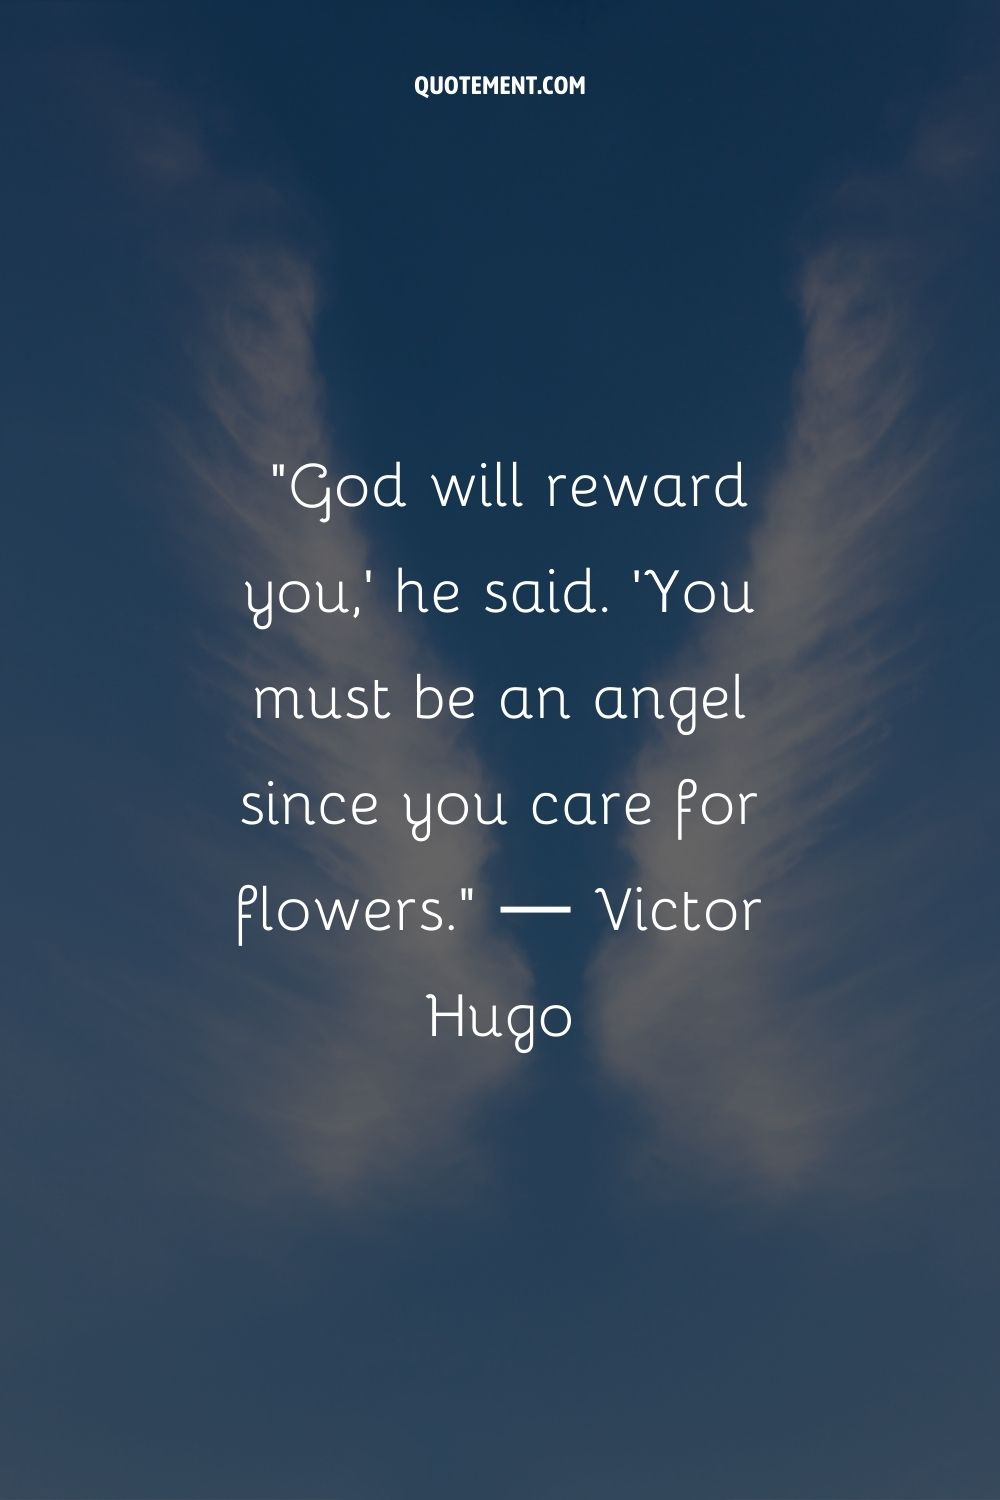 God will reward you,' he said. 'You must be an angel since you care for flowers.